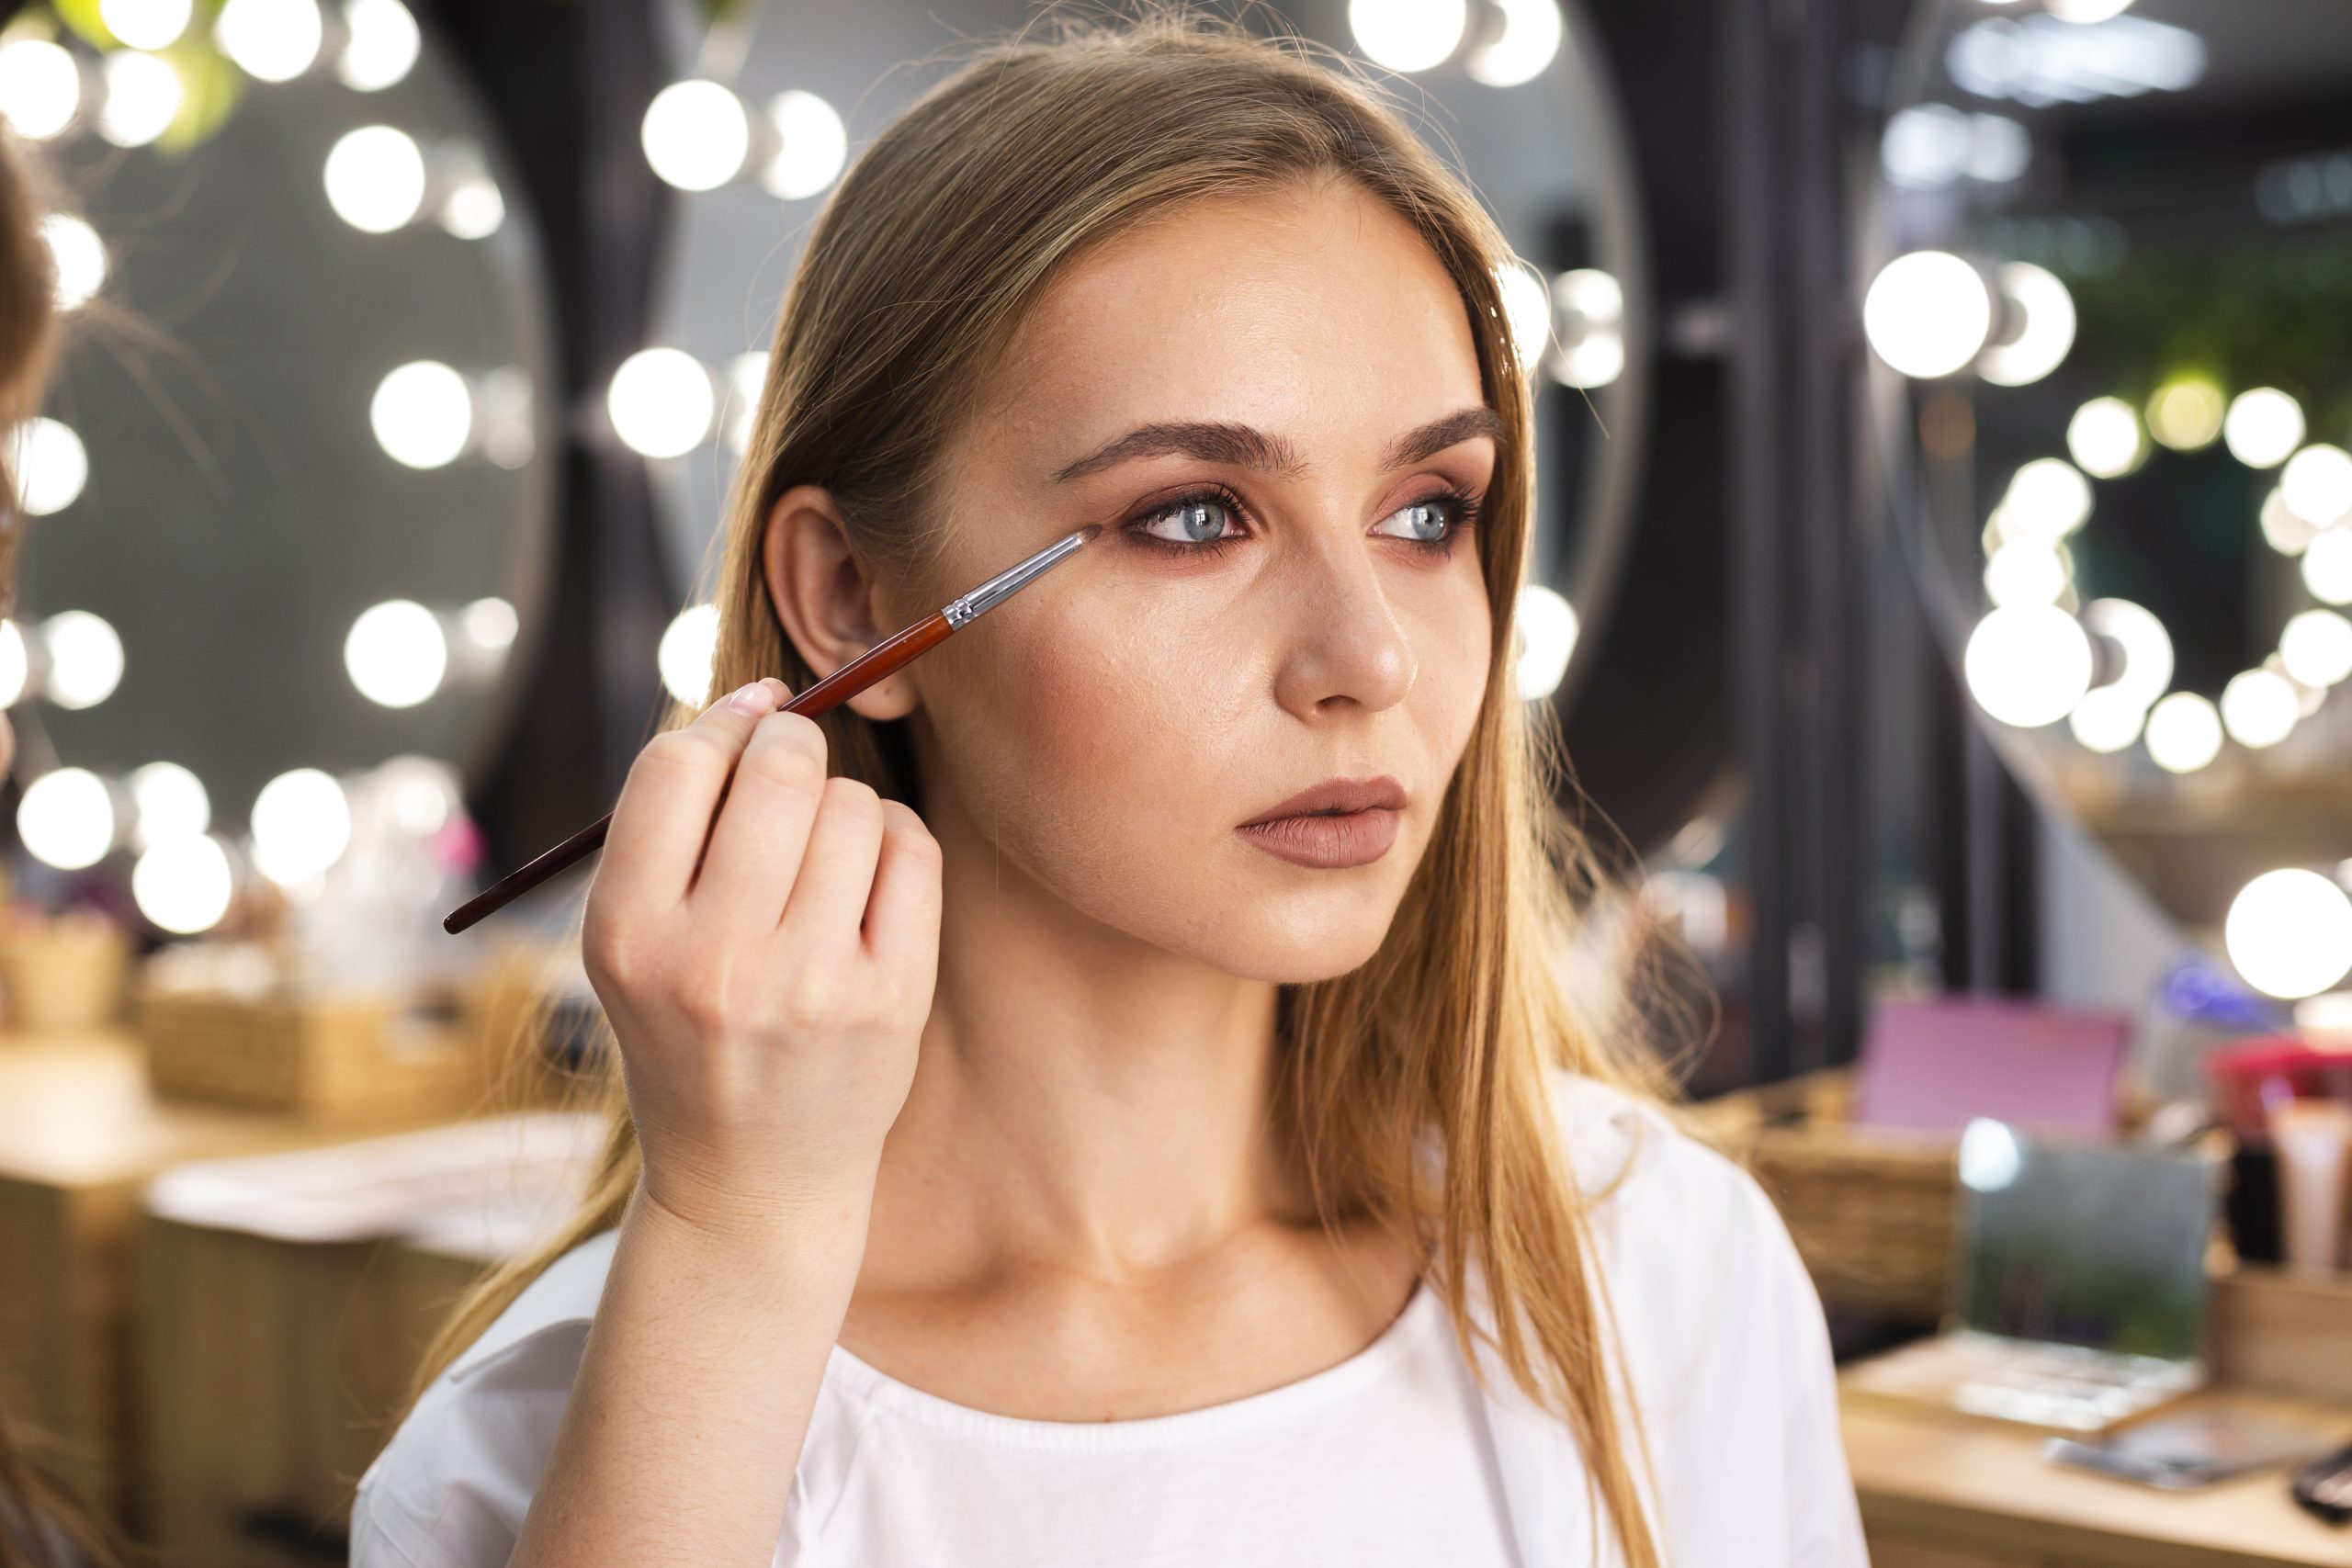 How to Choose Eyeliner for Blue and Other Eye Colors